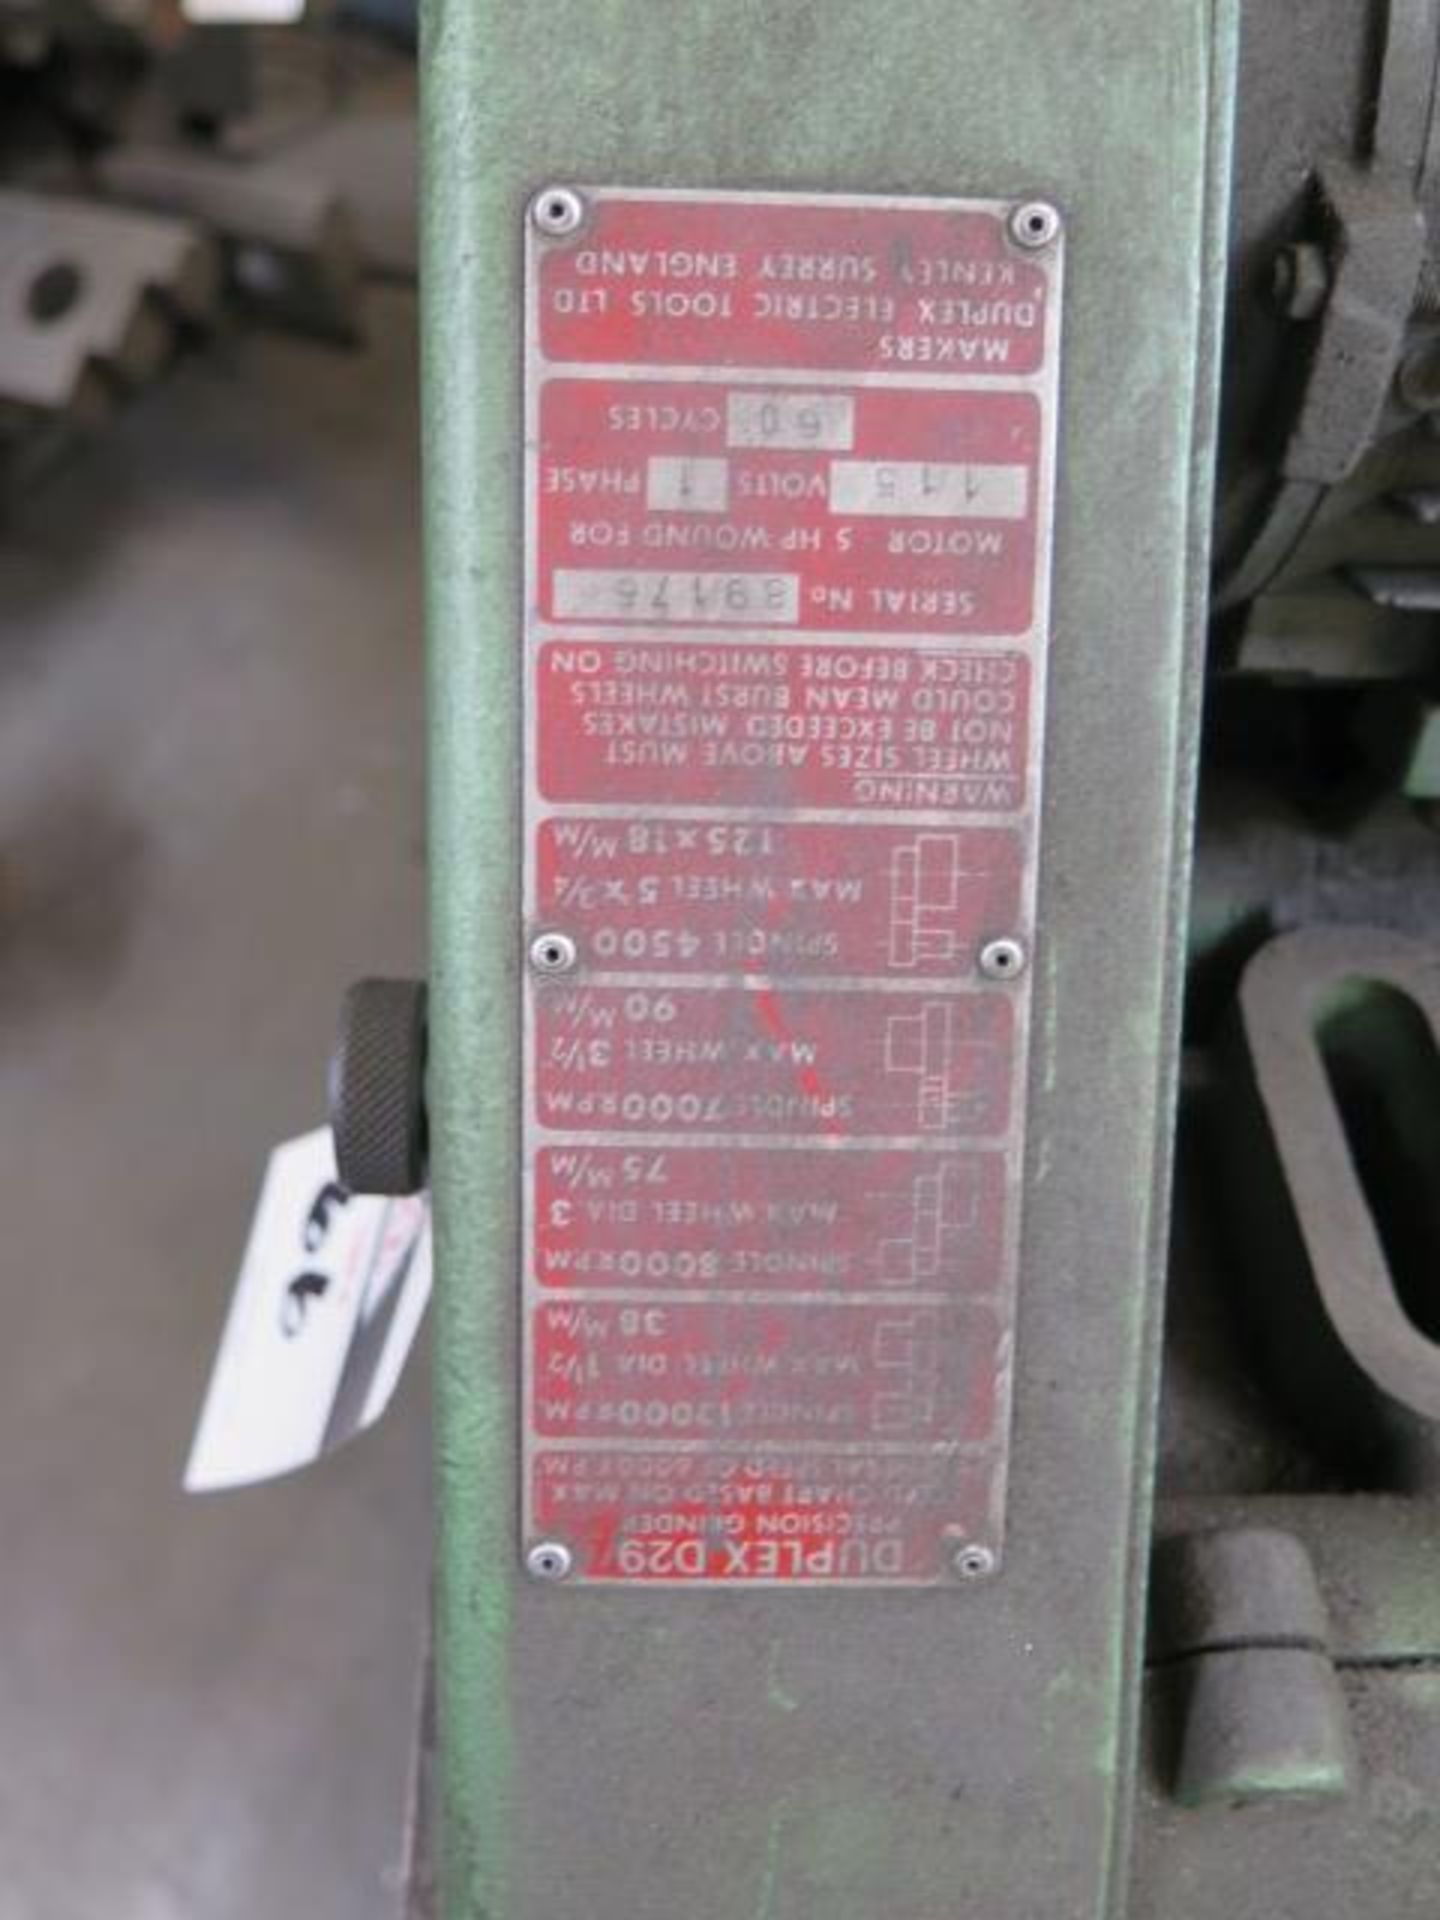 Duplex mdl. D29 Tool Post Grinder (SOLD AS-IS - NO WARRANTY) - Image 5 of 6